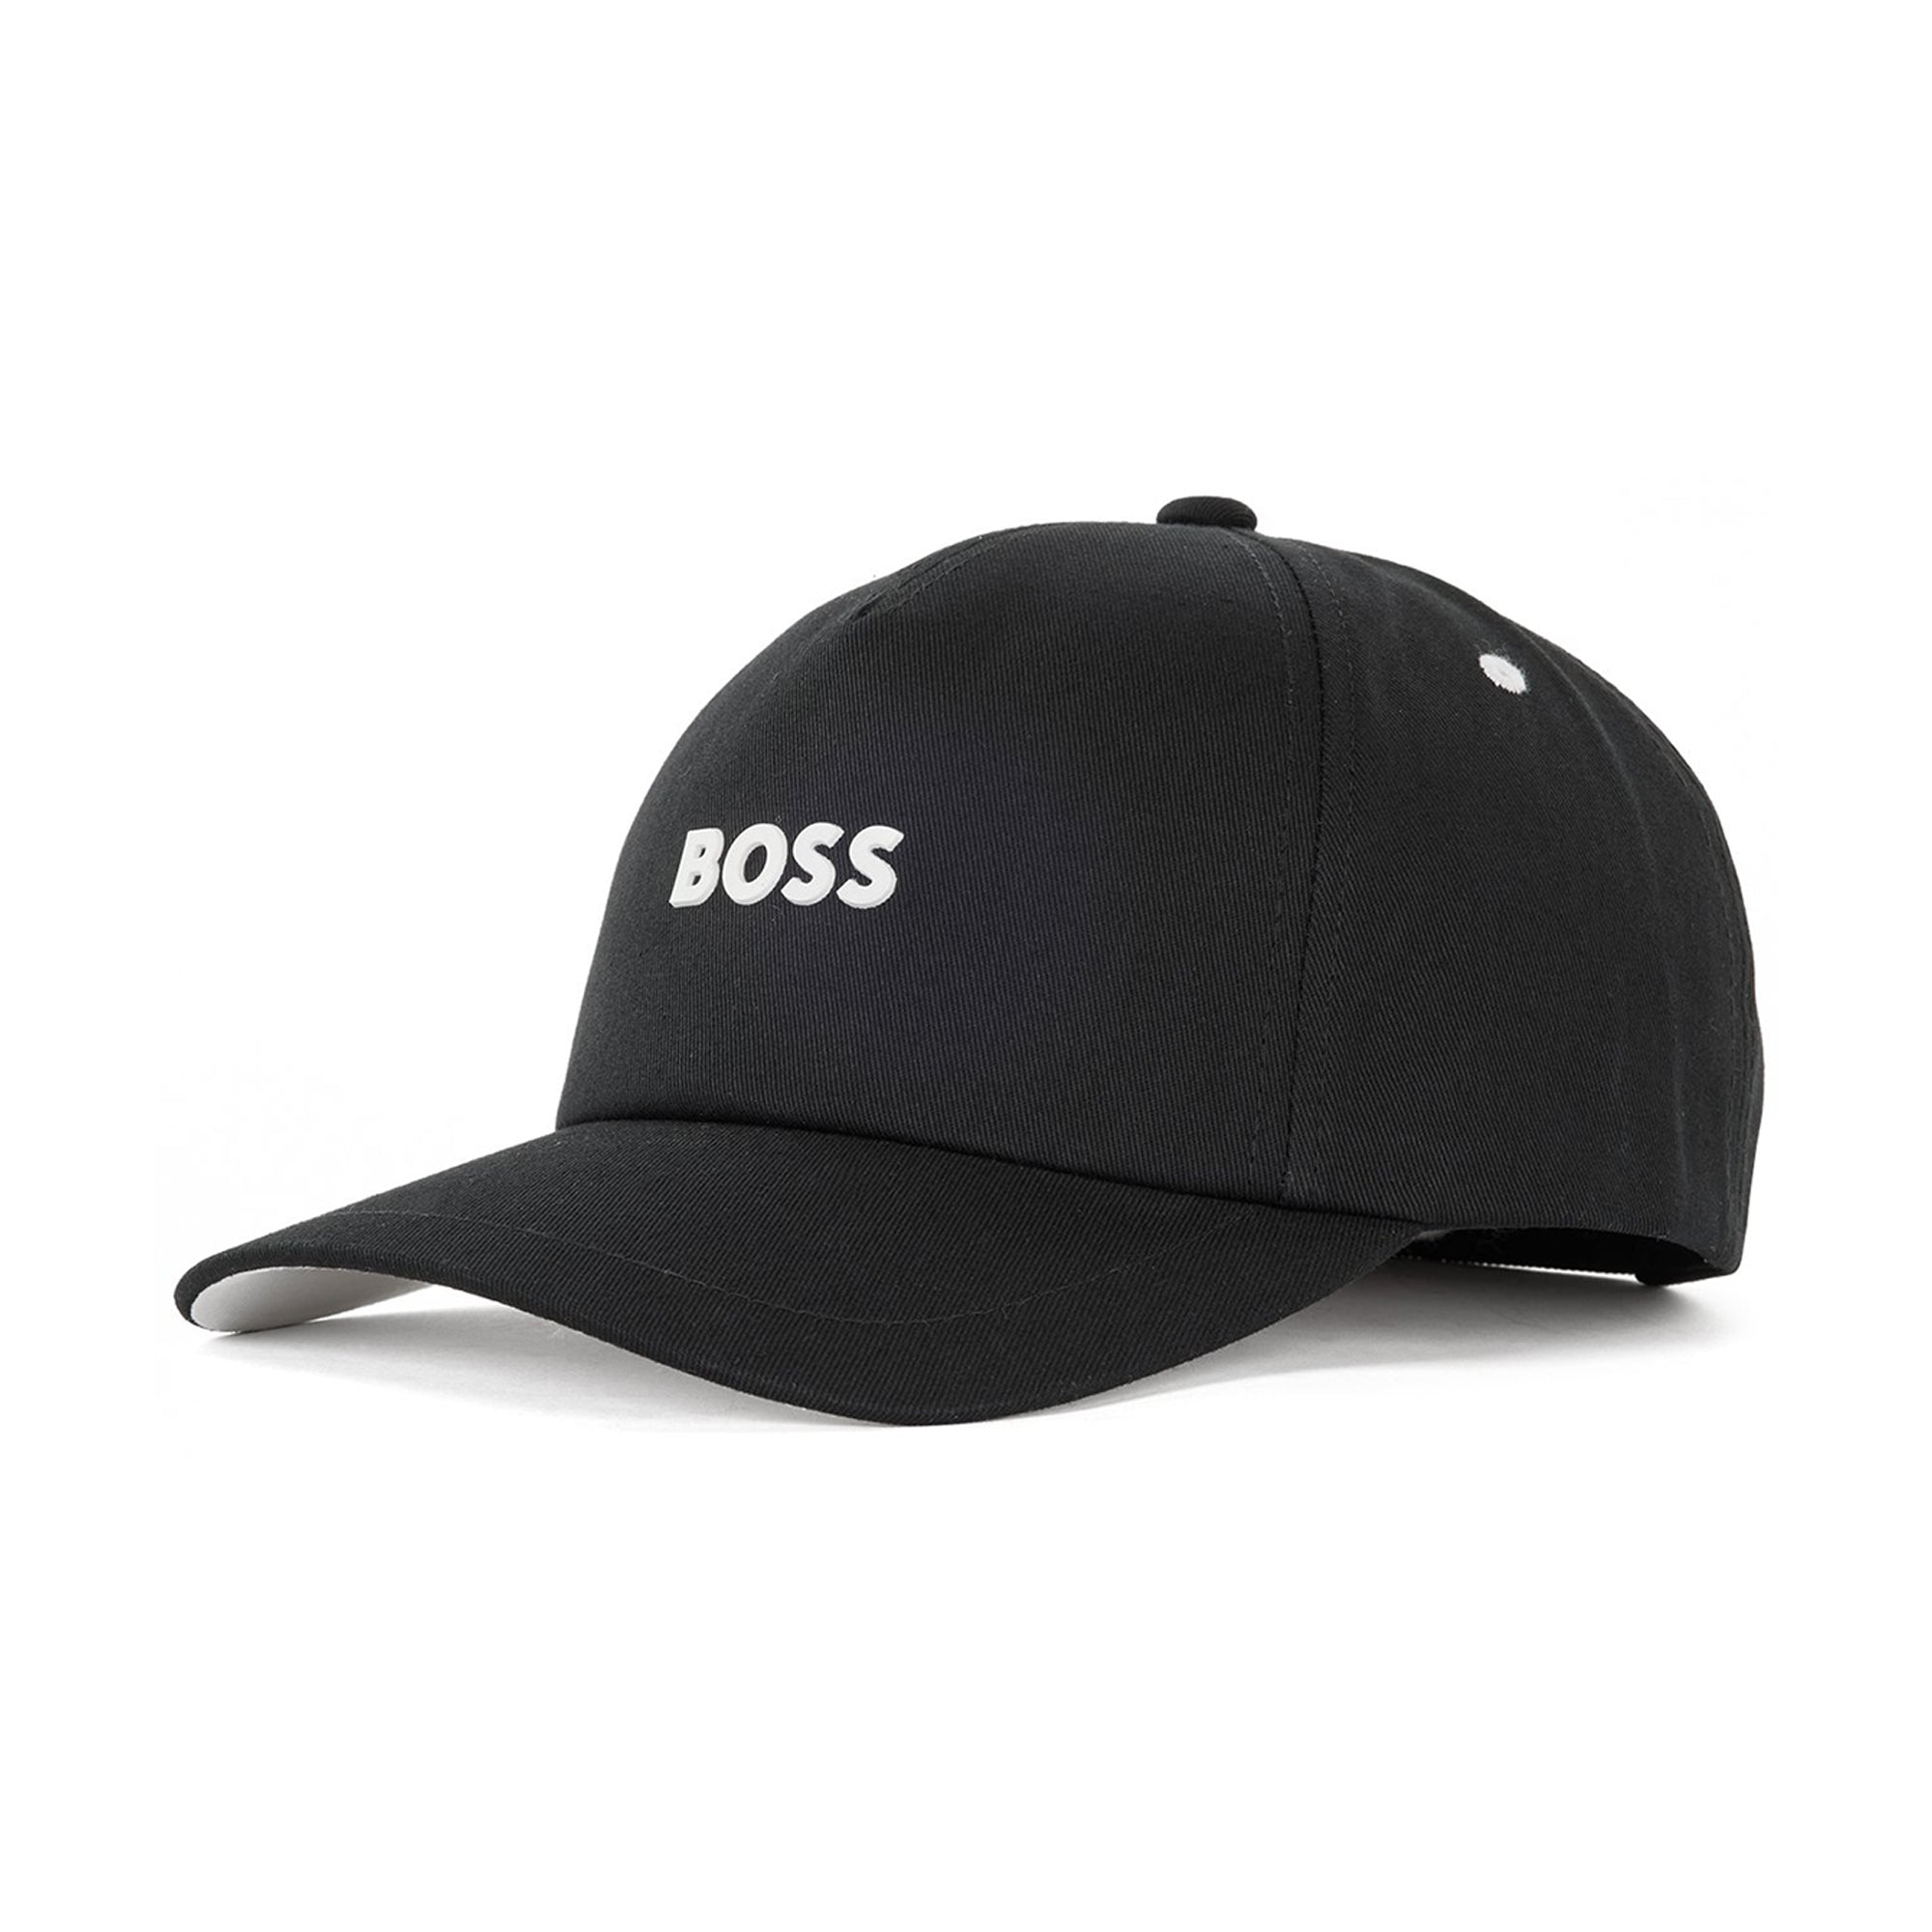 Boss Zed - Cap Embroidered Cotton Beige